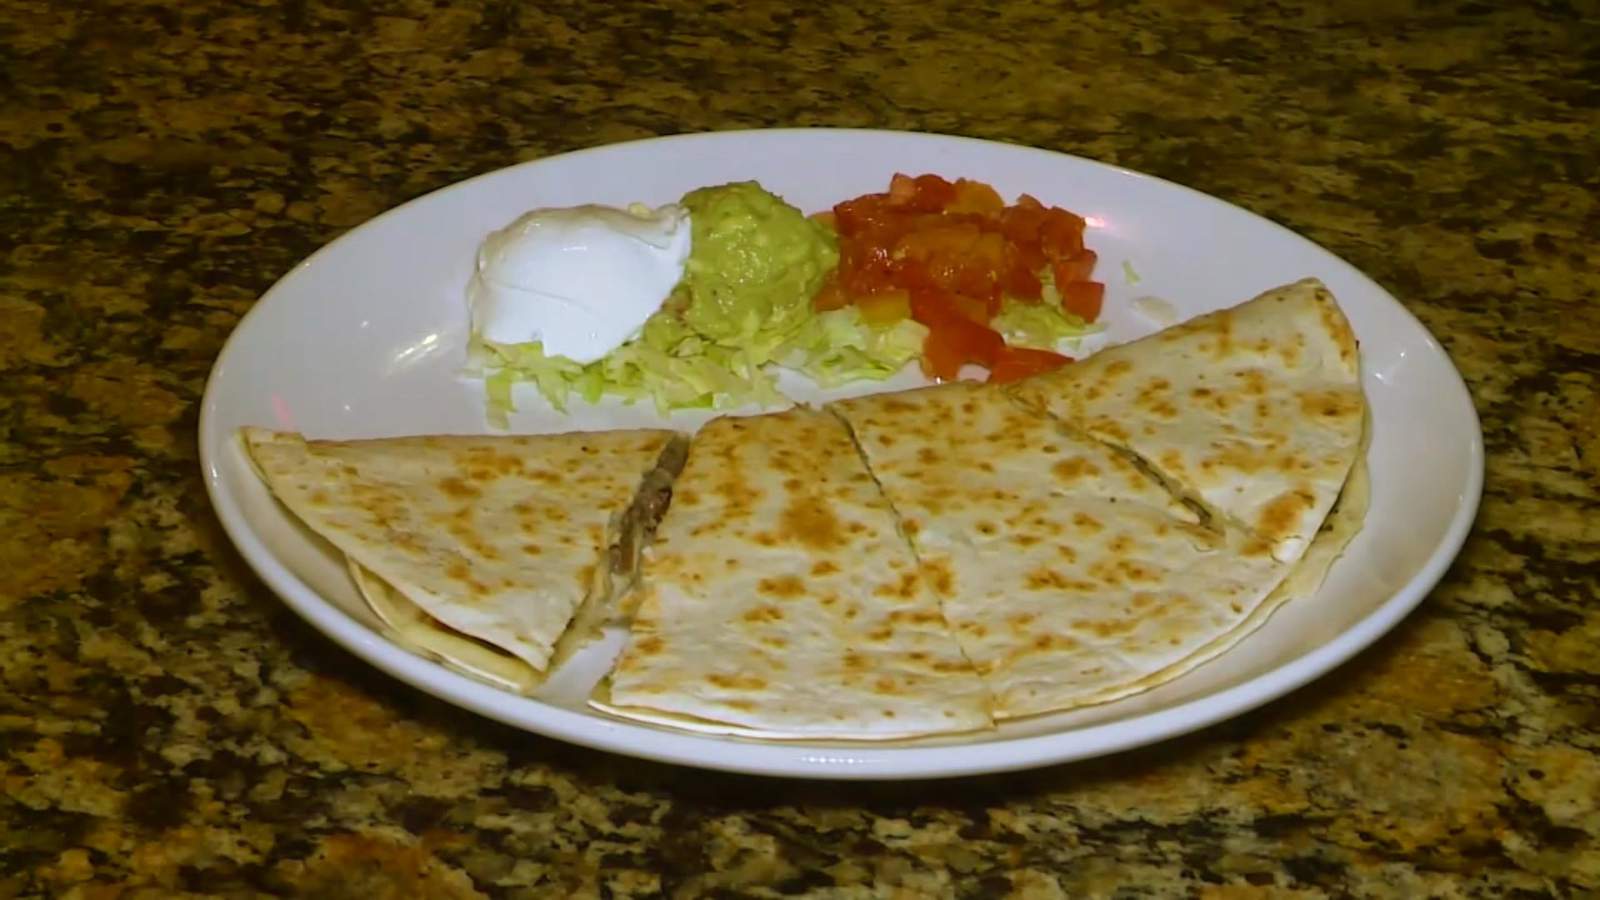 Takeout Shoutout: Alicia’s Mexican Grille in the spotlight